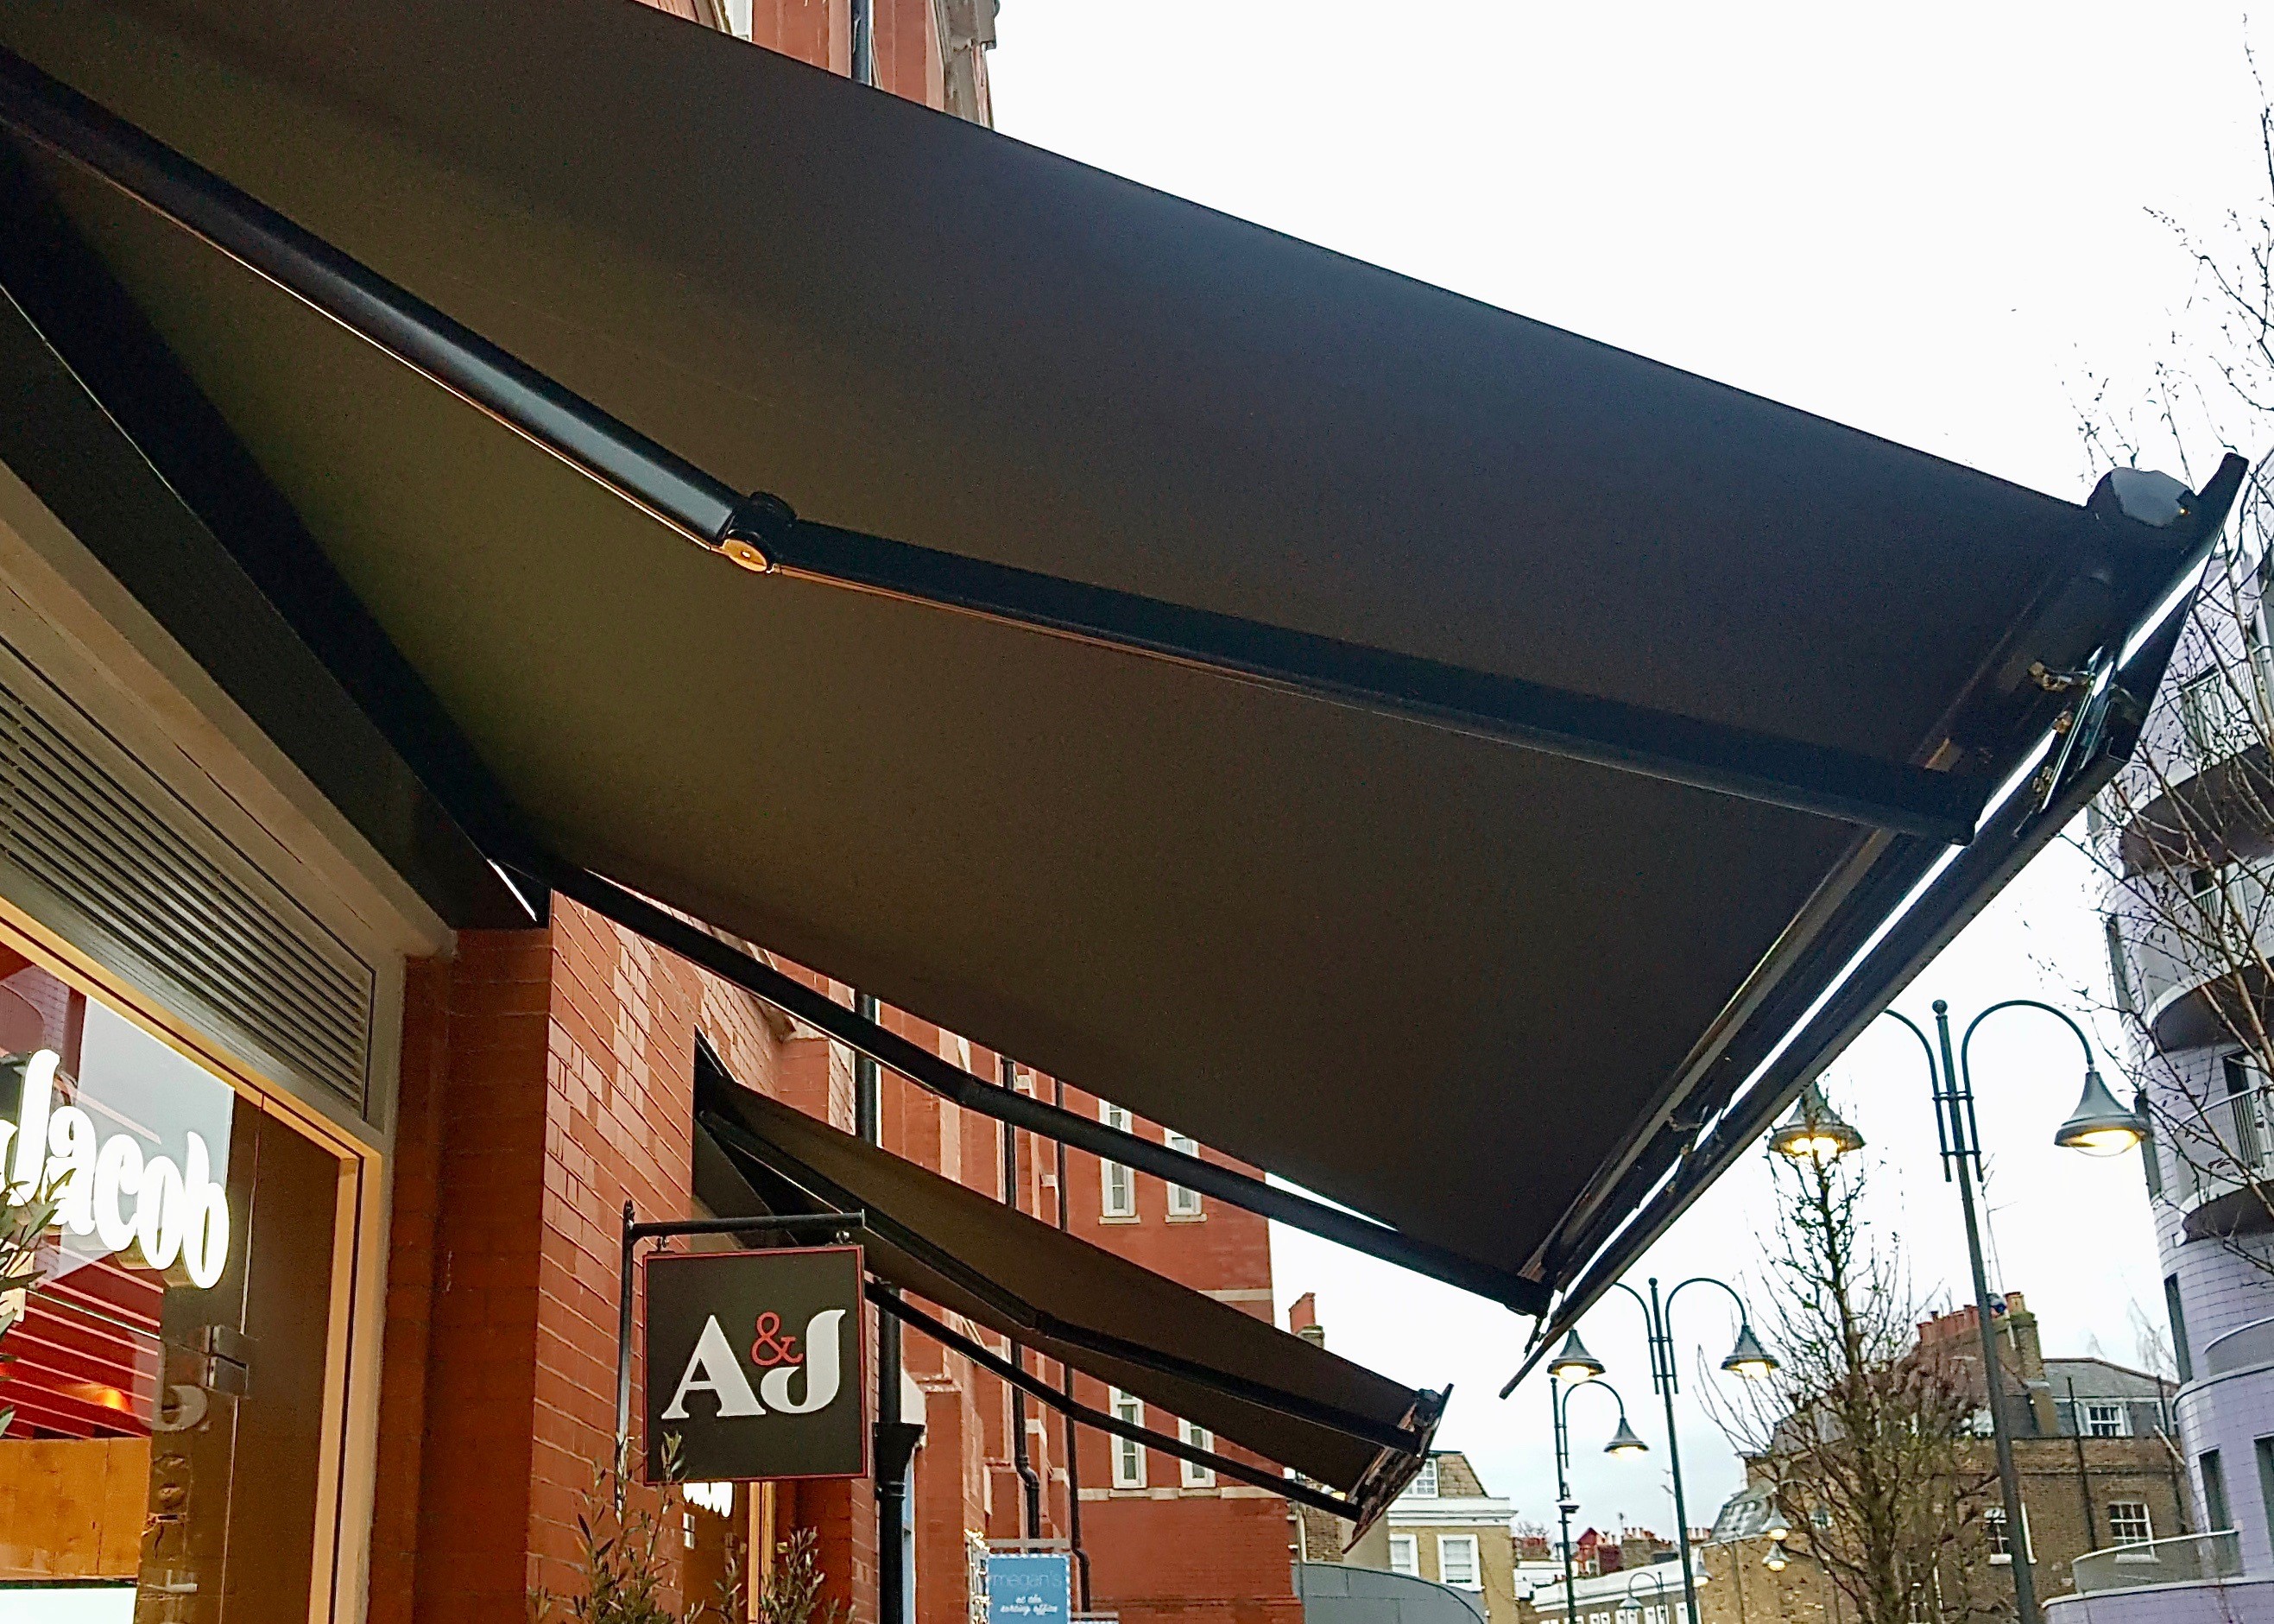 Bespoke awning boxes on our SQ2 awnings for Arlo&Jacob.